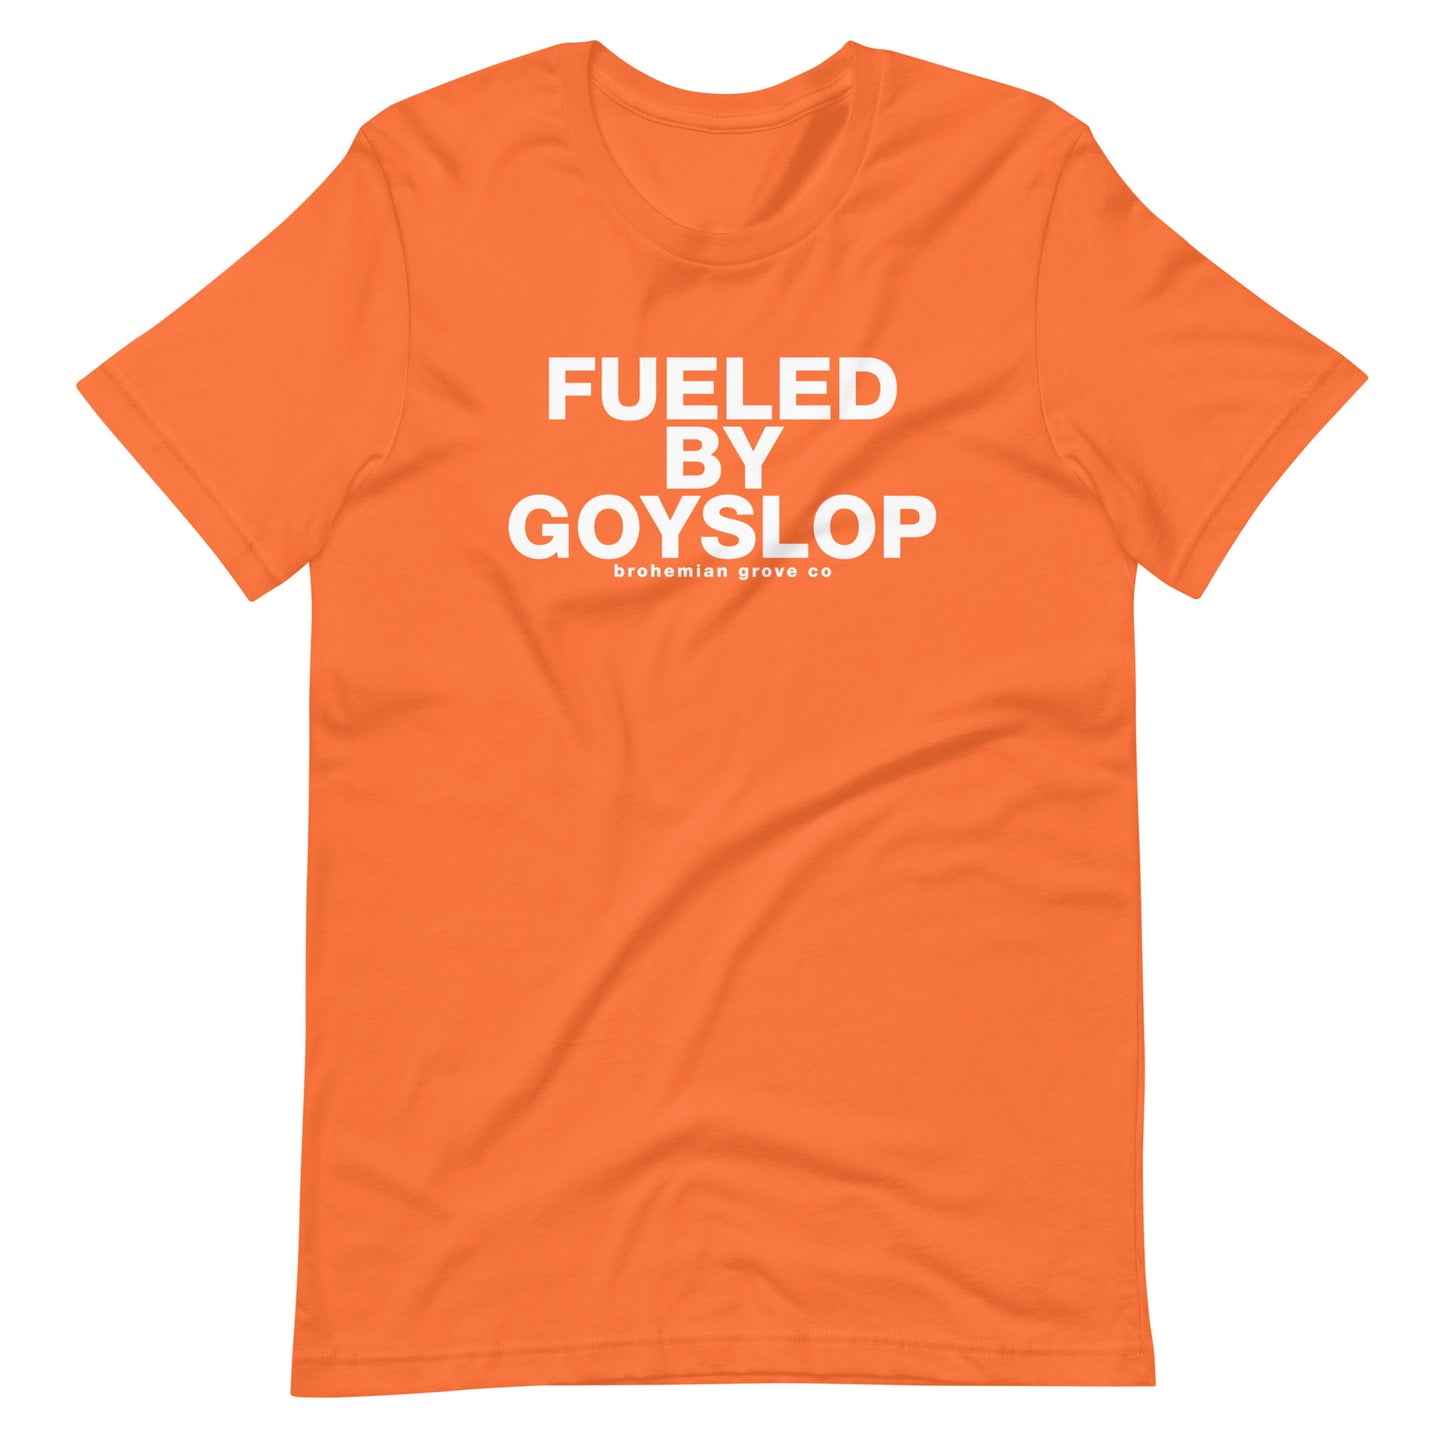 Fueled by Goyslop Unisex T-Shirt